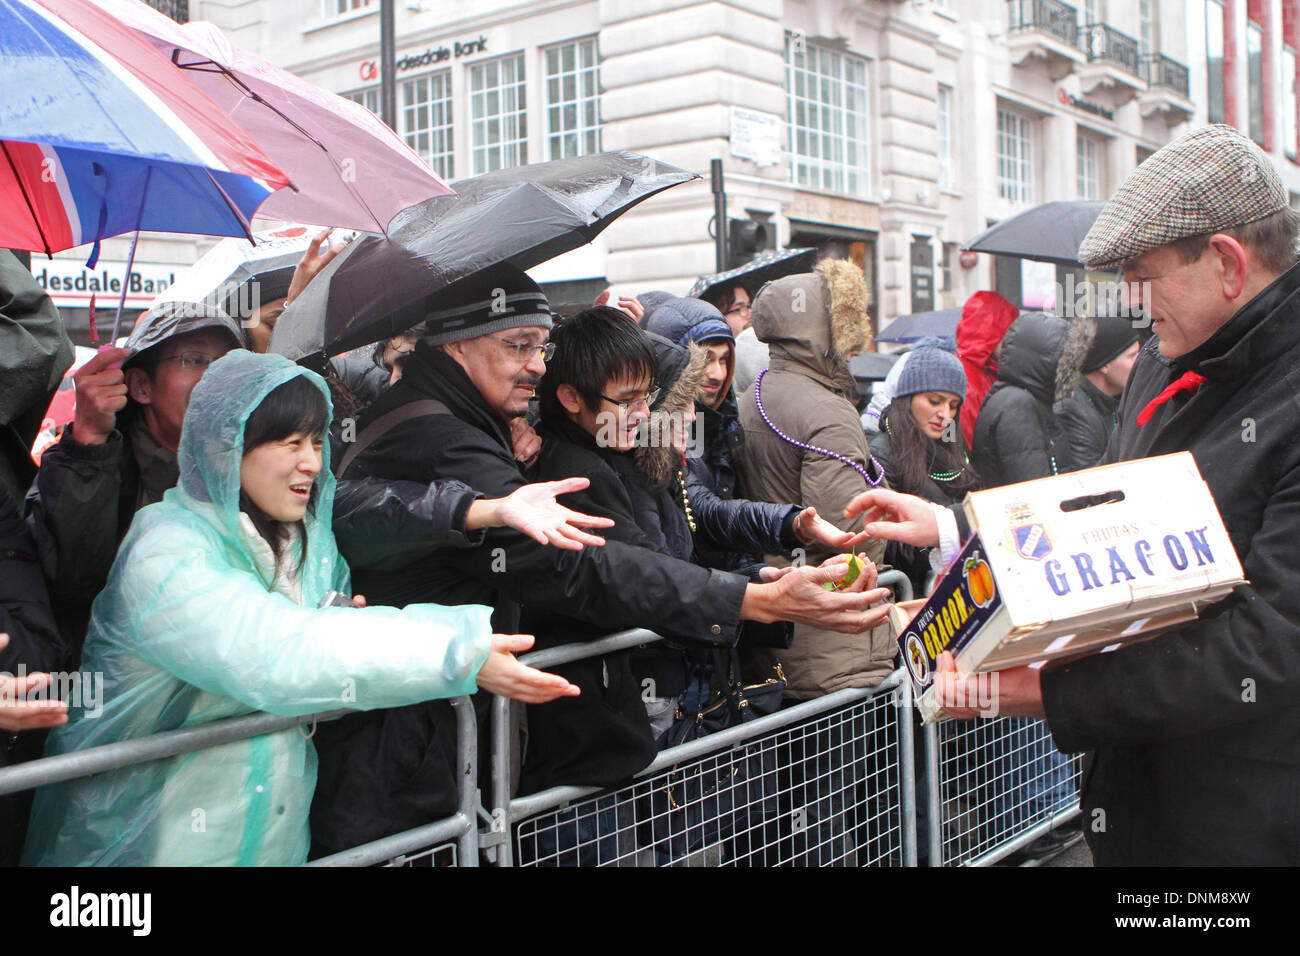 London,UK,1er janvier 2014,distribuant des satsumas au London's New Year's Day Parade 2014 Credit : Keith Larby/Alamy Live News Banque D'Images